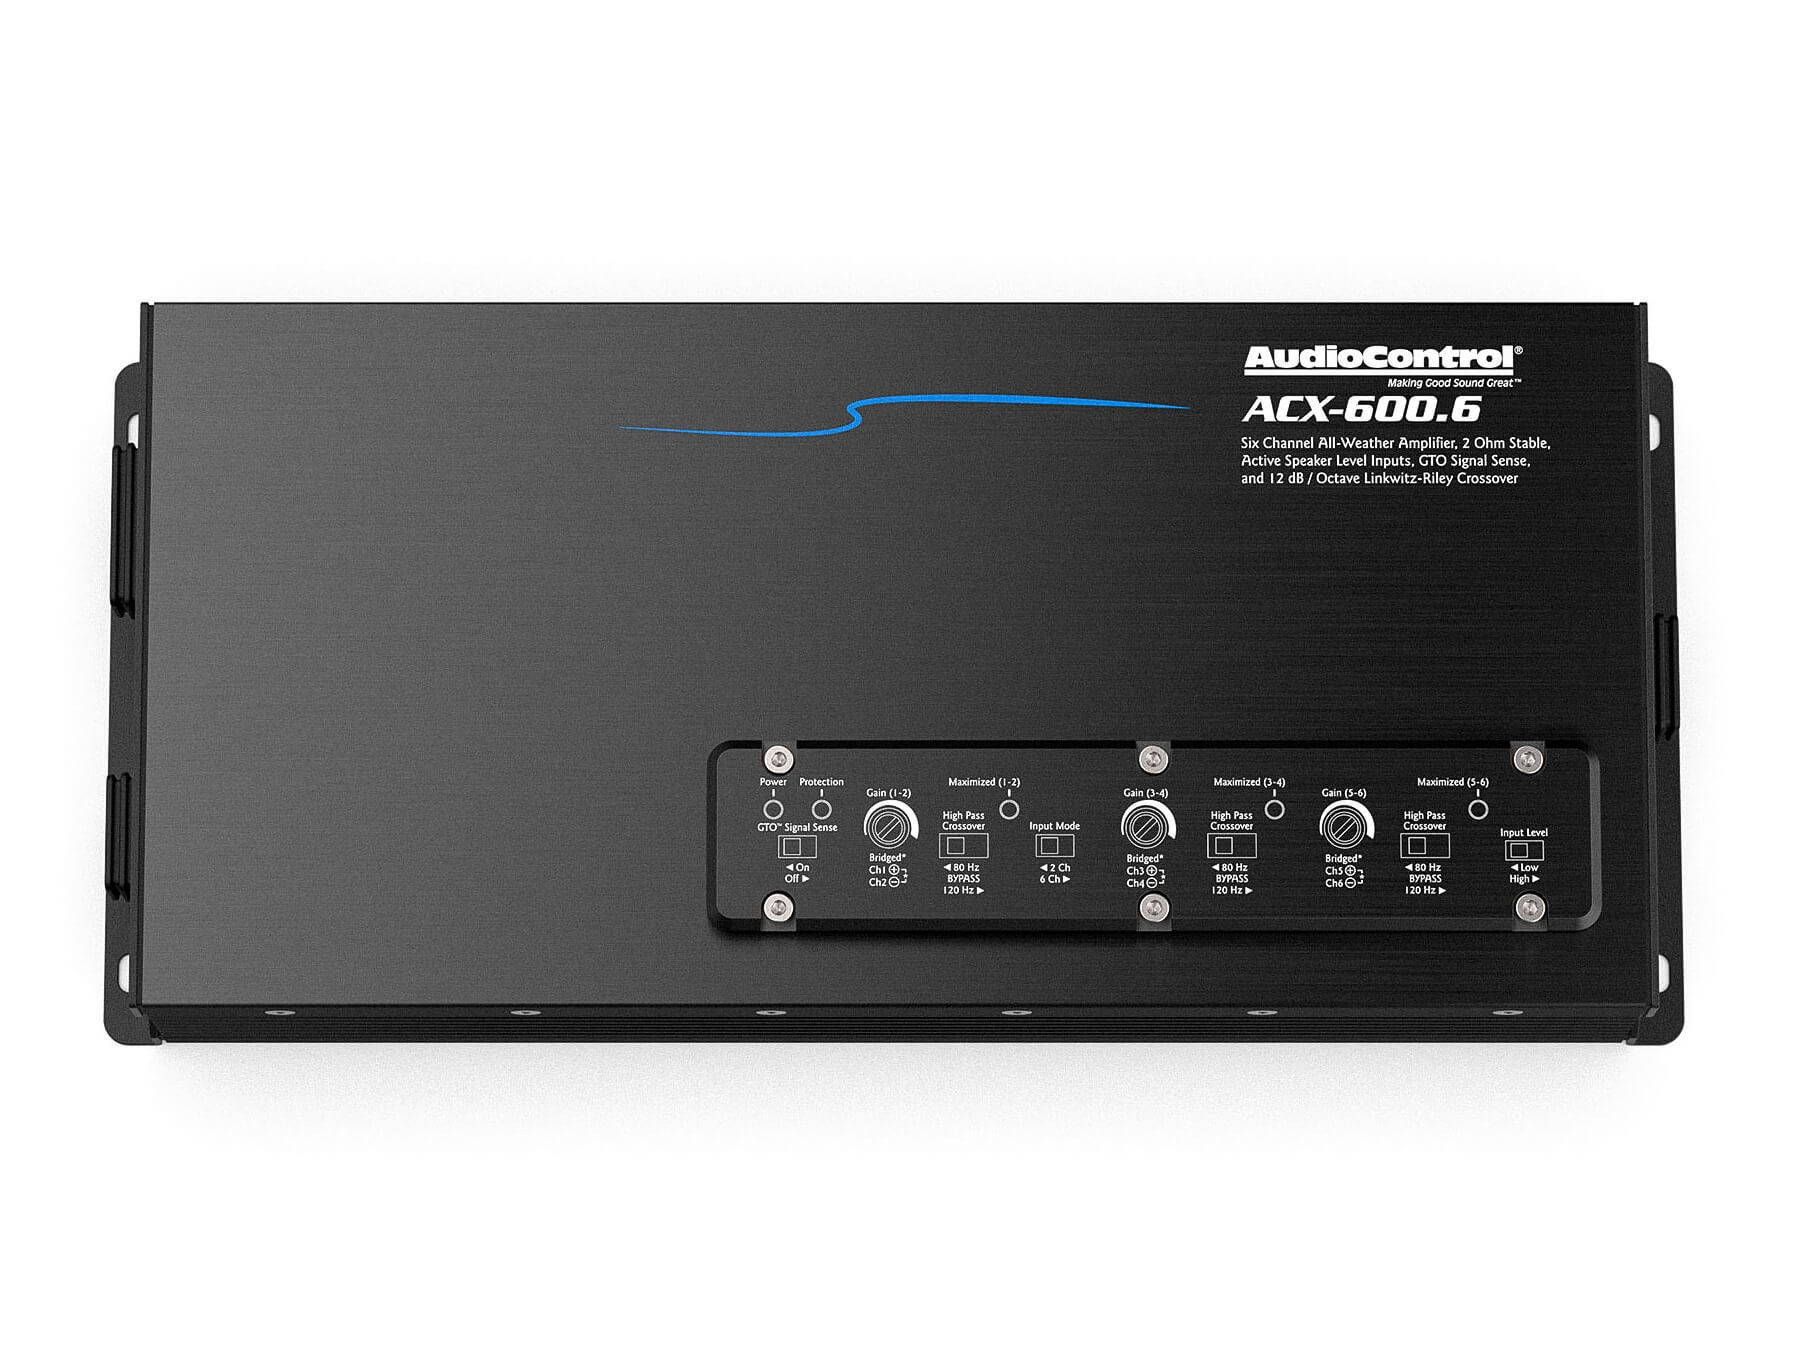 AudioControl ACX-600.6 - Top / With Cover